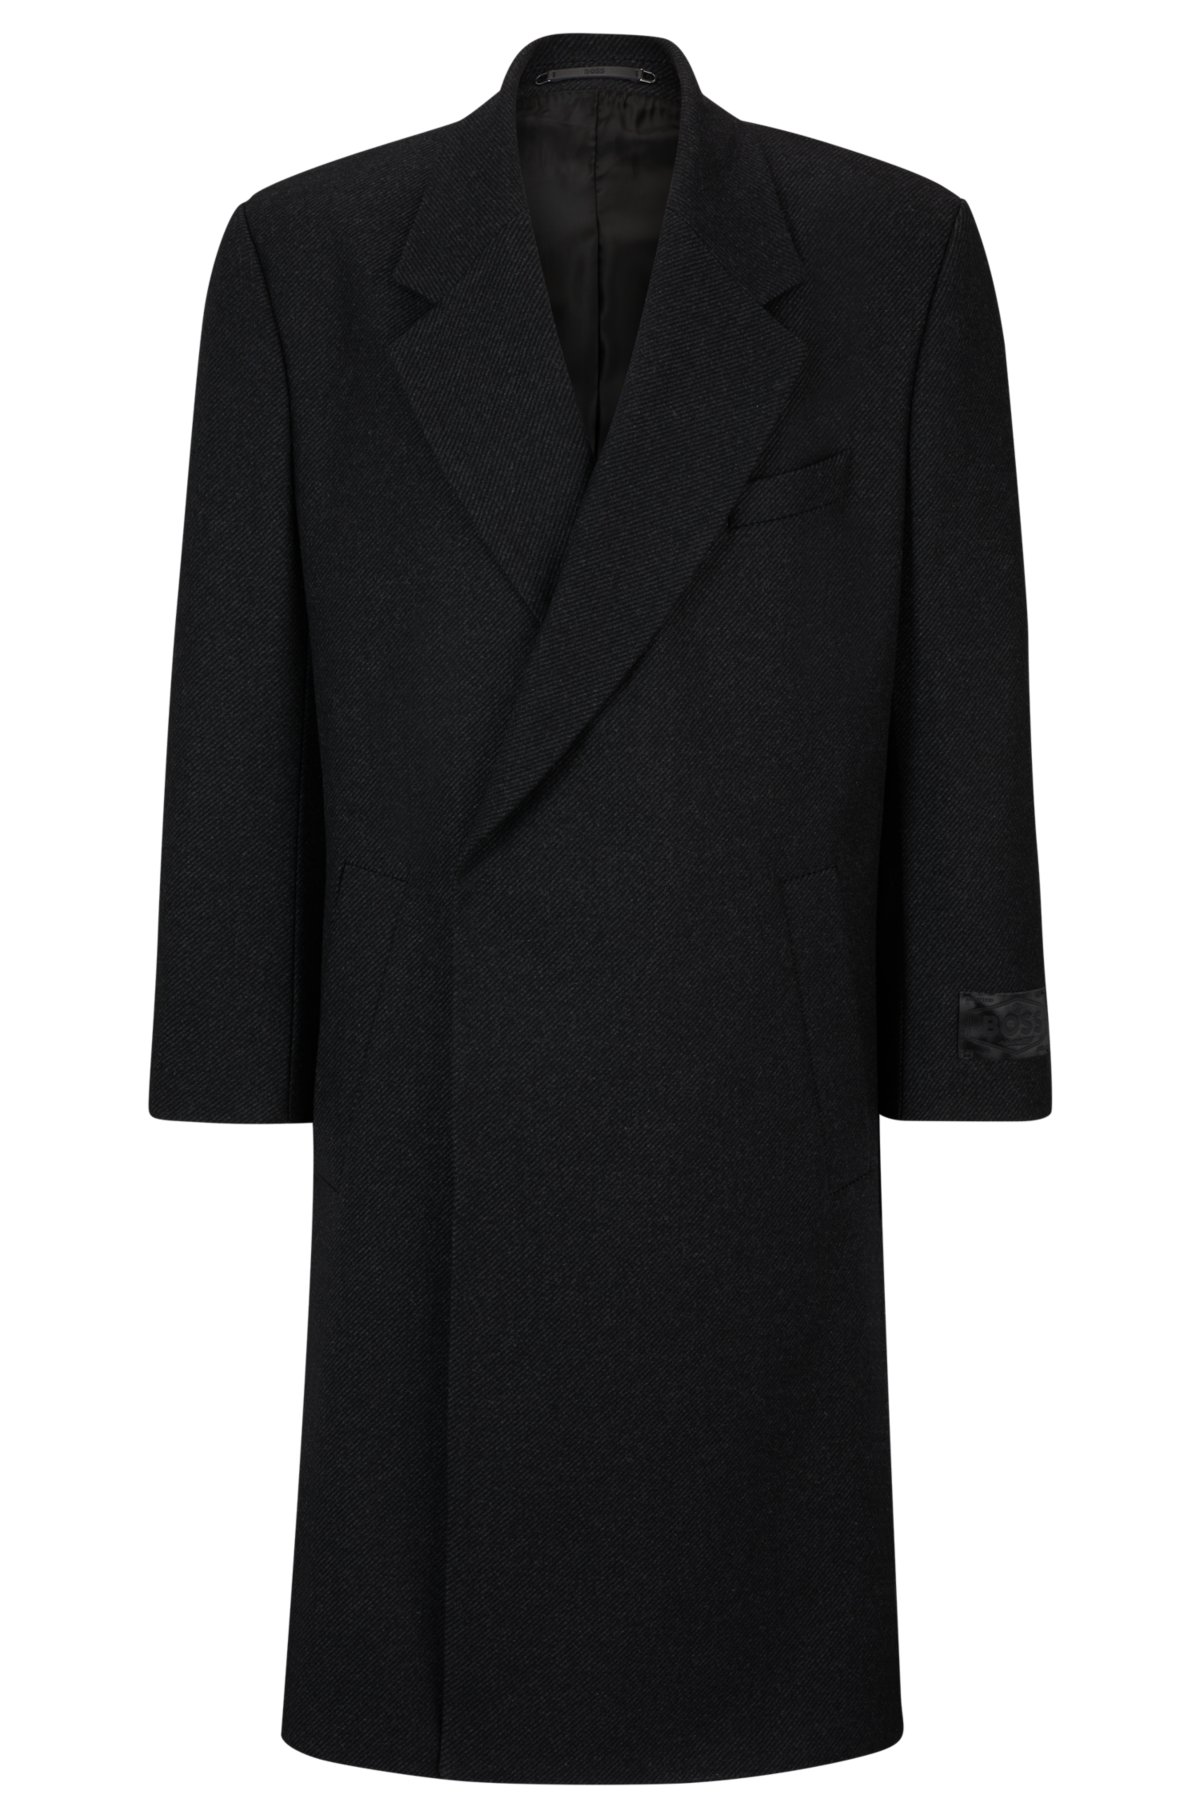 BOSS - Double-breasted, regular-fit coat in a wool blend